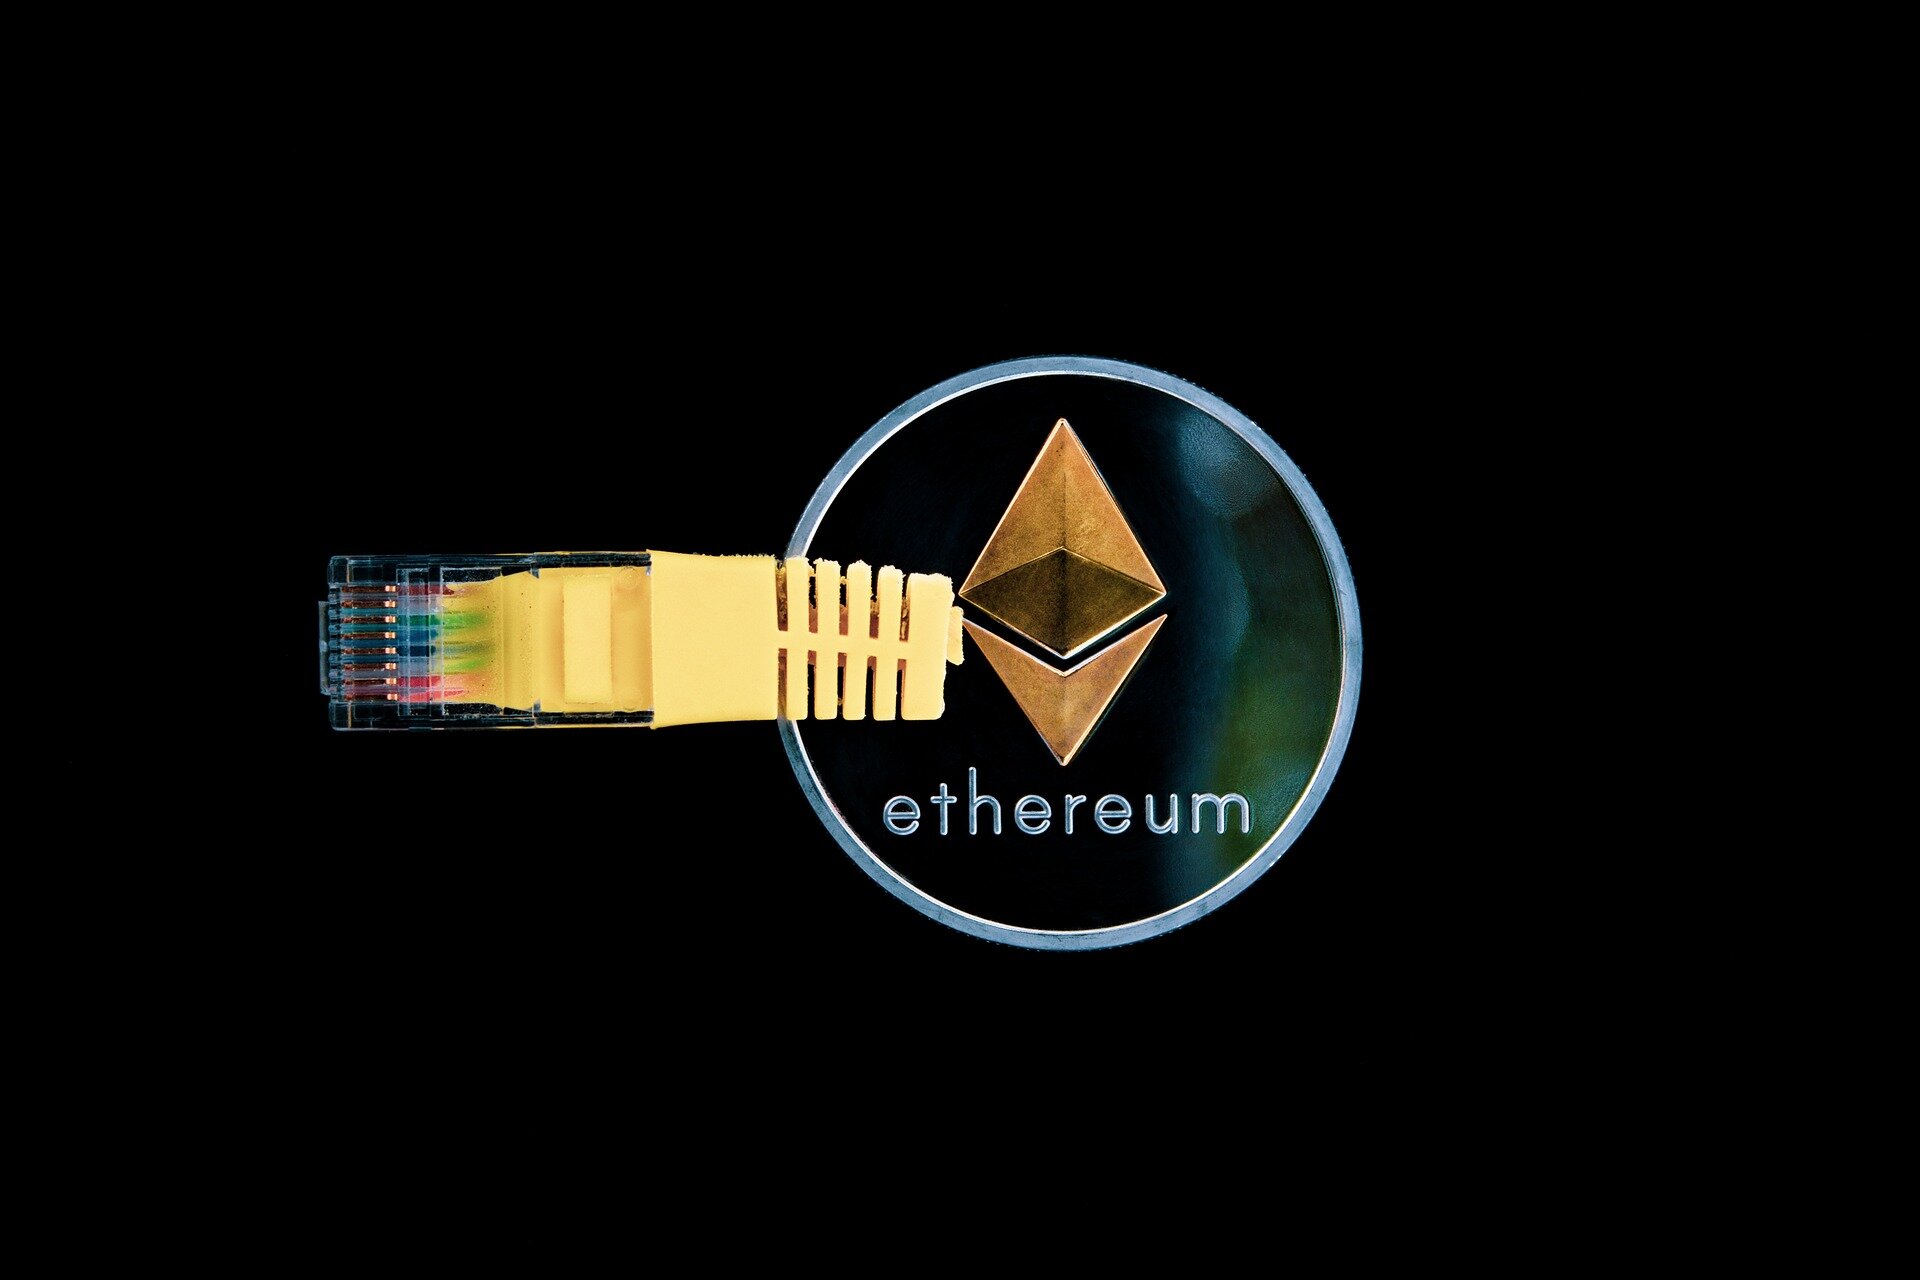 Cryptocurrencies can be more sustainable by following Ethereum’s lead, says researcher